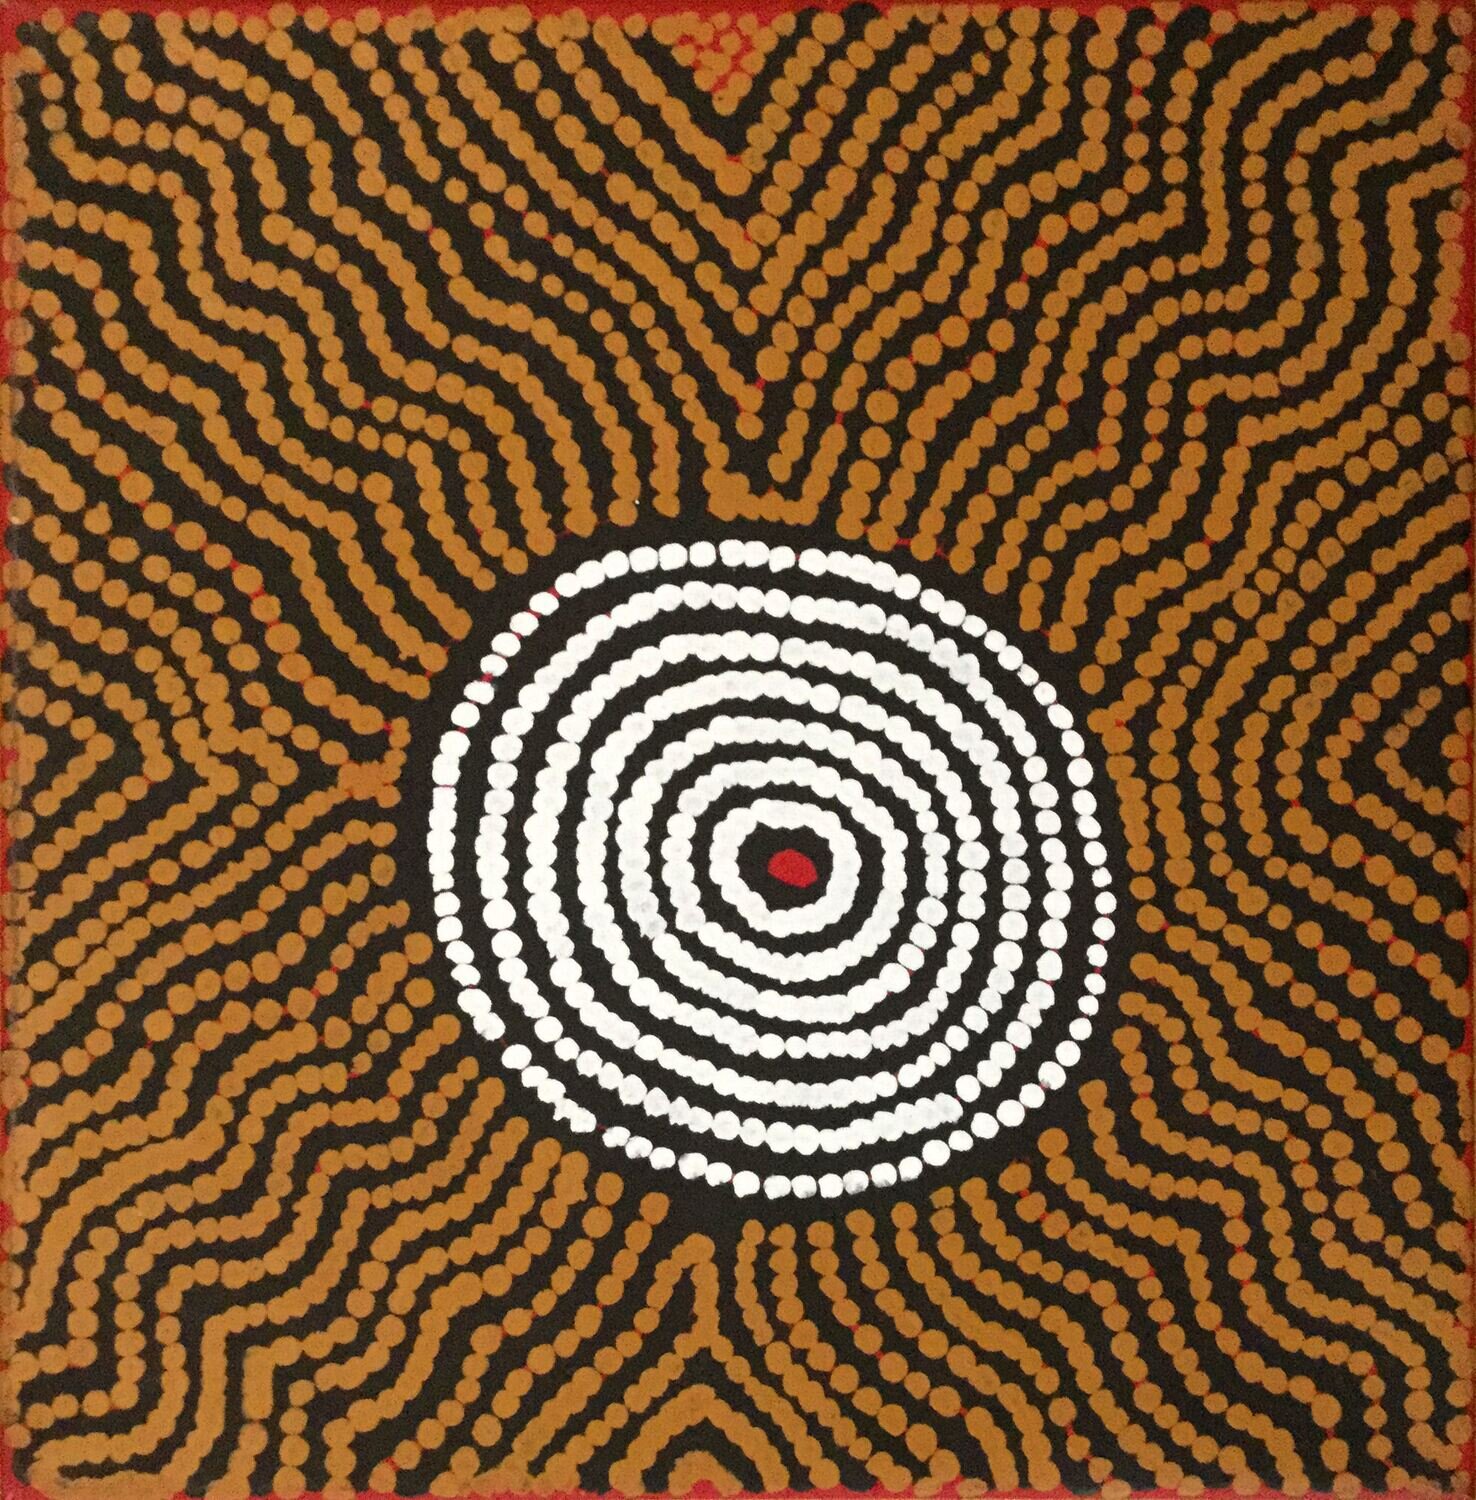 Tingari Cycle, 2005 by Barney Campbell Tjakamarra 61x61cm Cat 9020BC